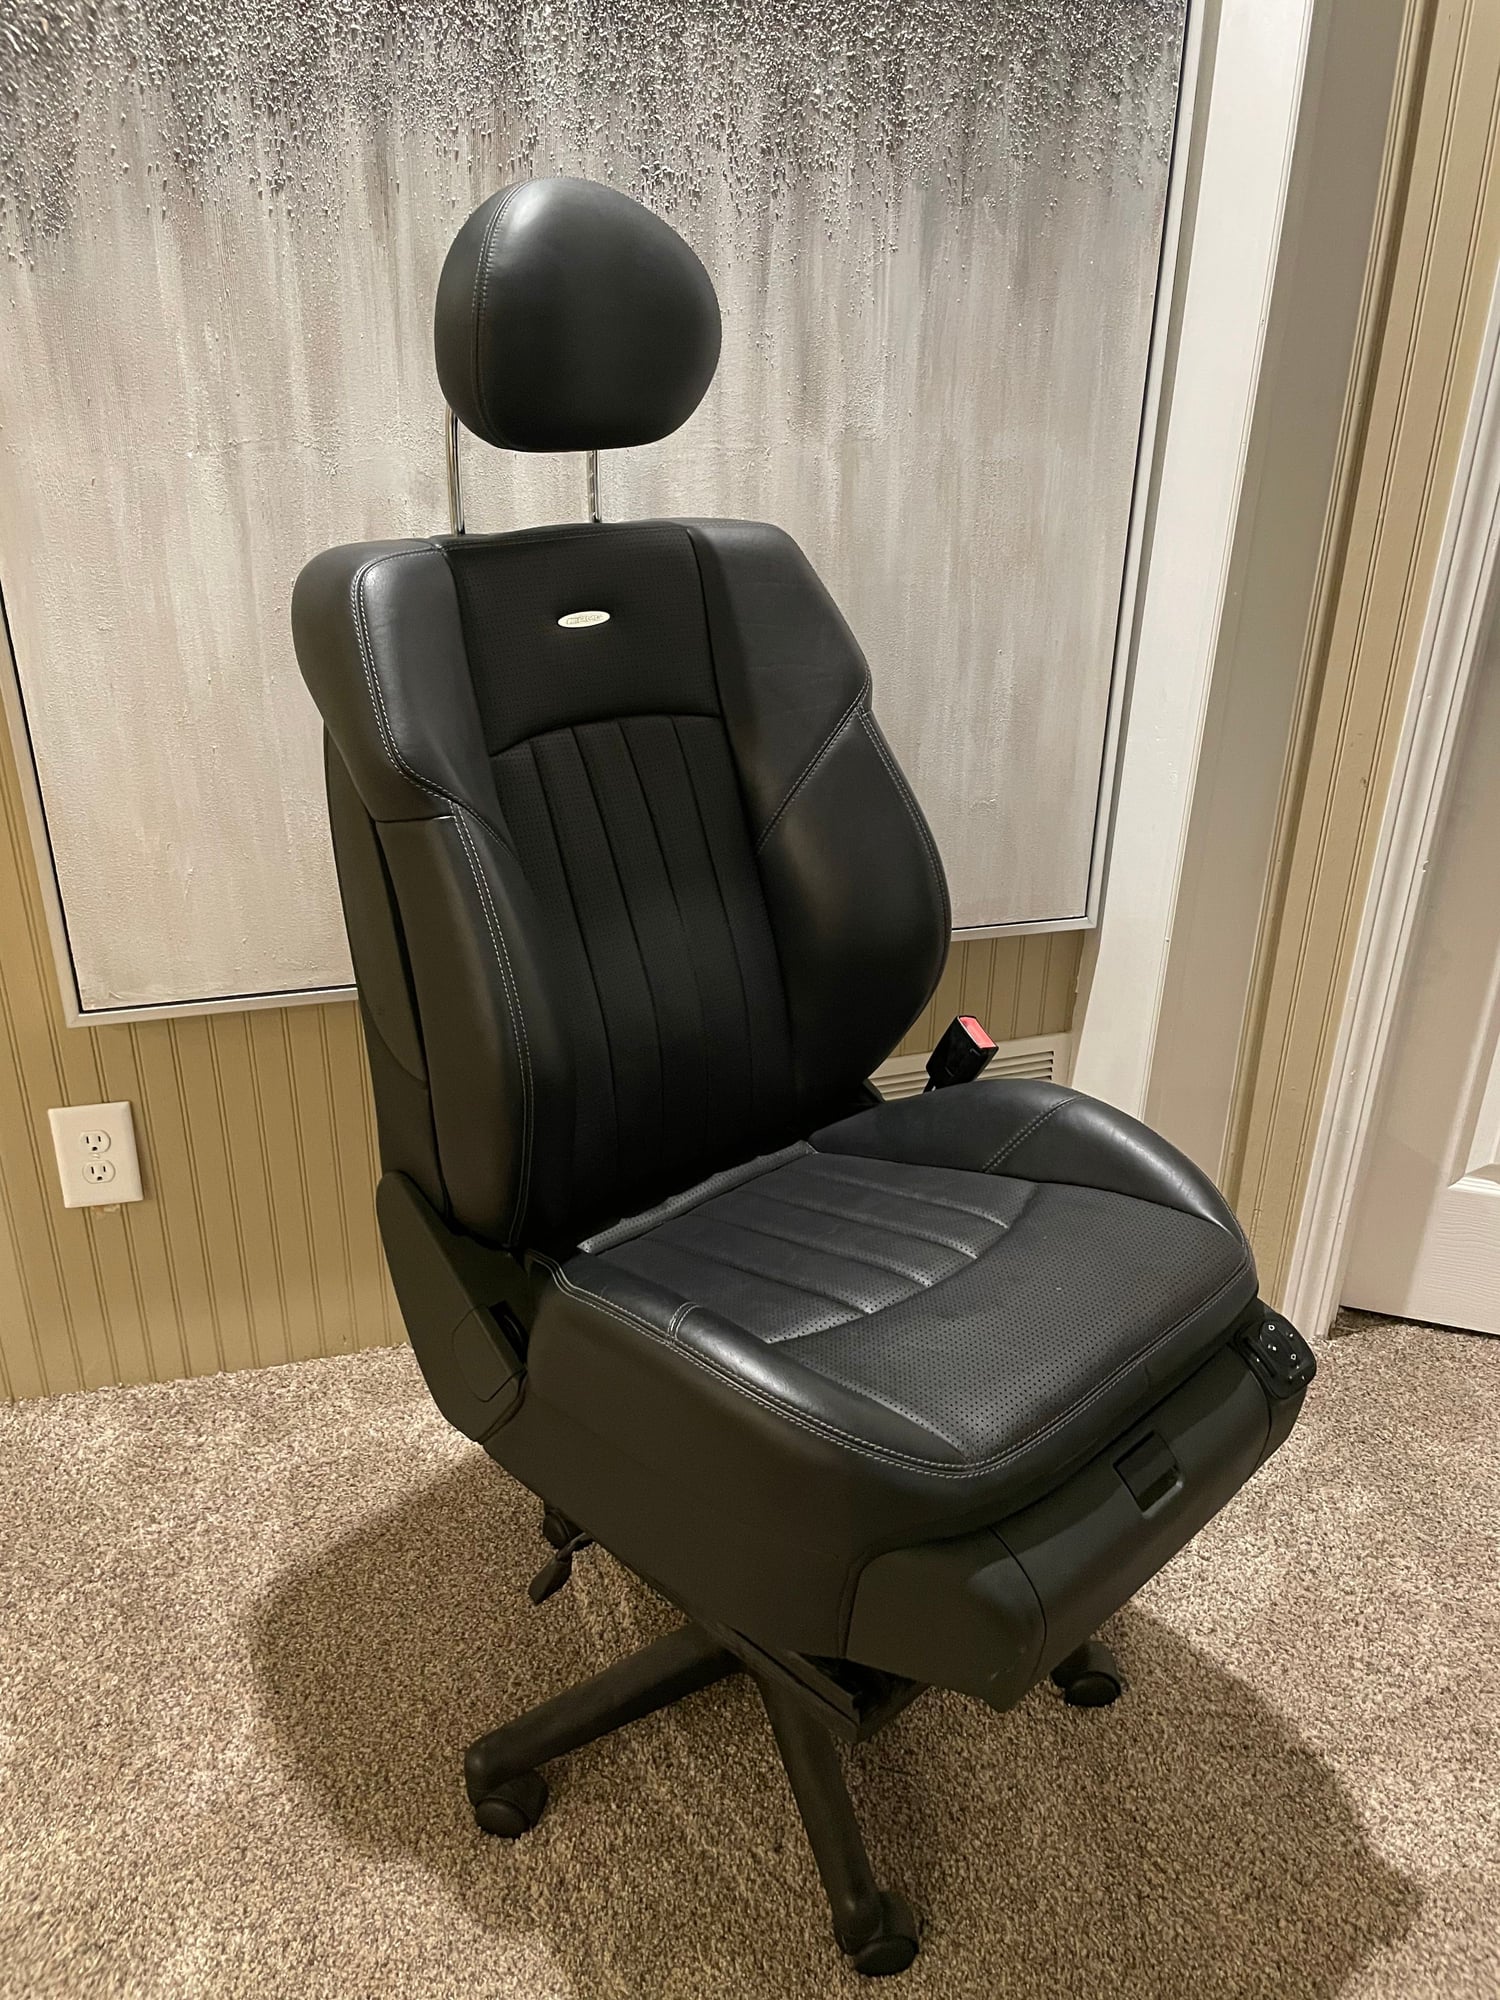 Interior/Upholstery - W211 E55 Office Chair - Used - 2006 to 2011 Mercedes-Benz E55 AMG - Marietta, GA 30068, United States